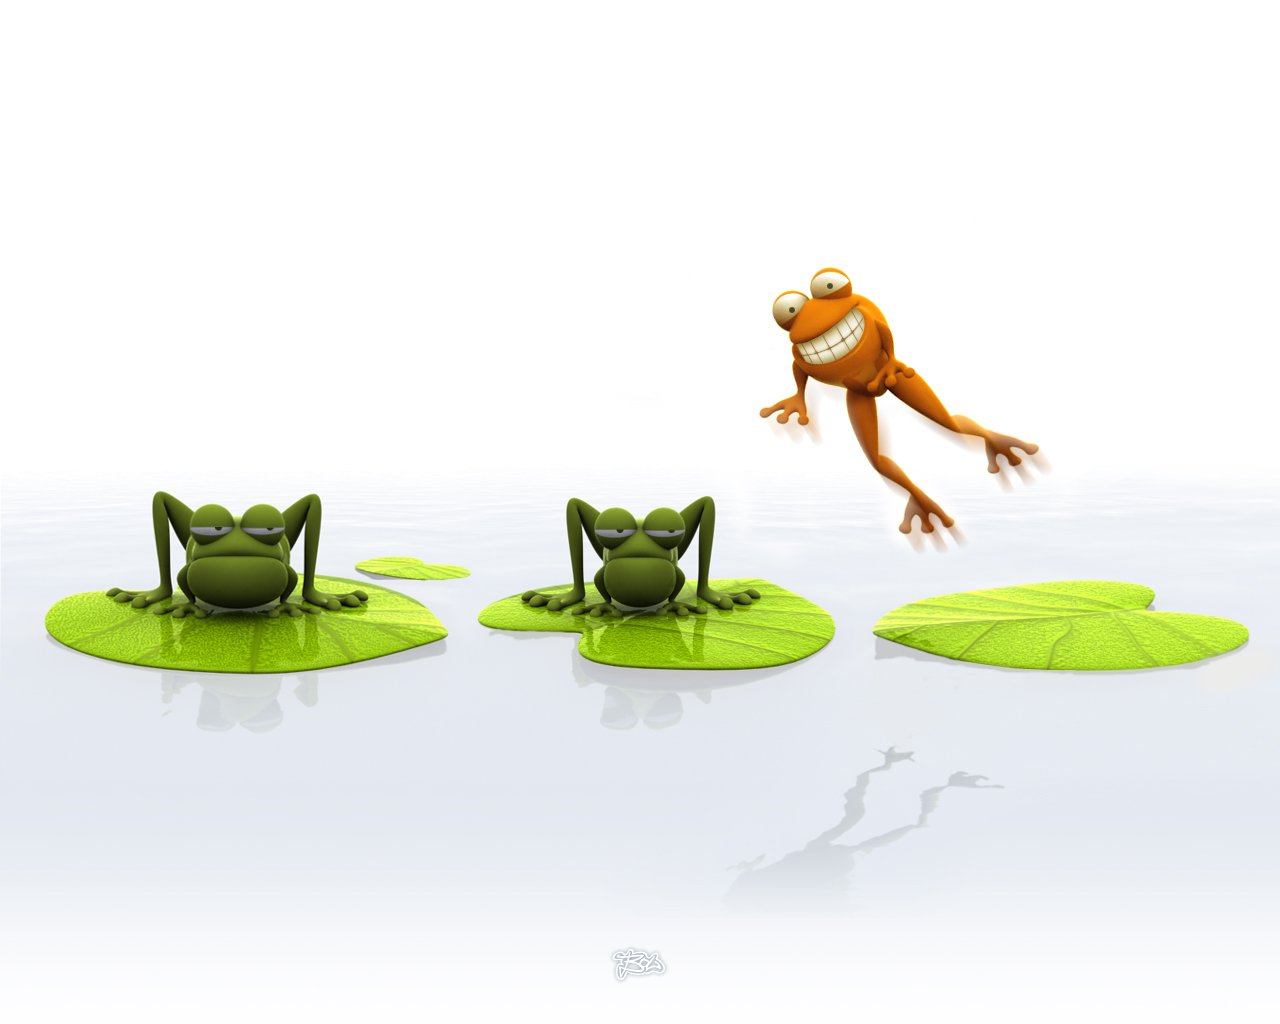 3D frog wallpaper is a great wallpaper for your computer desktop and